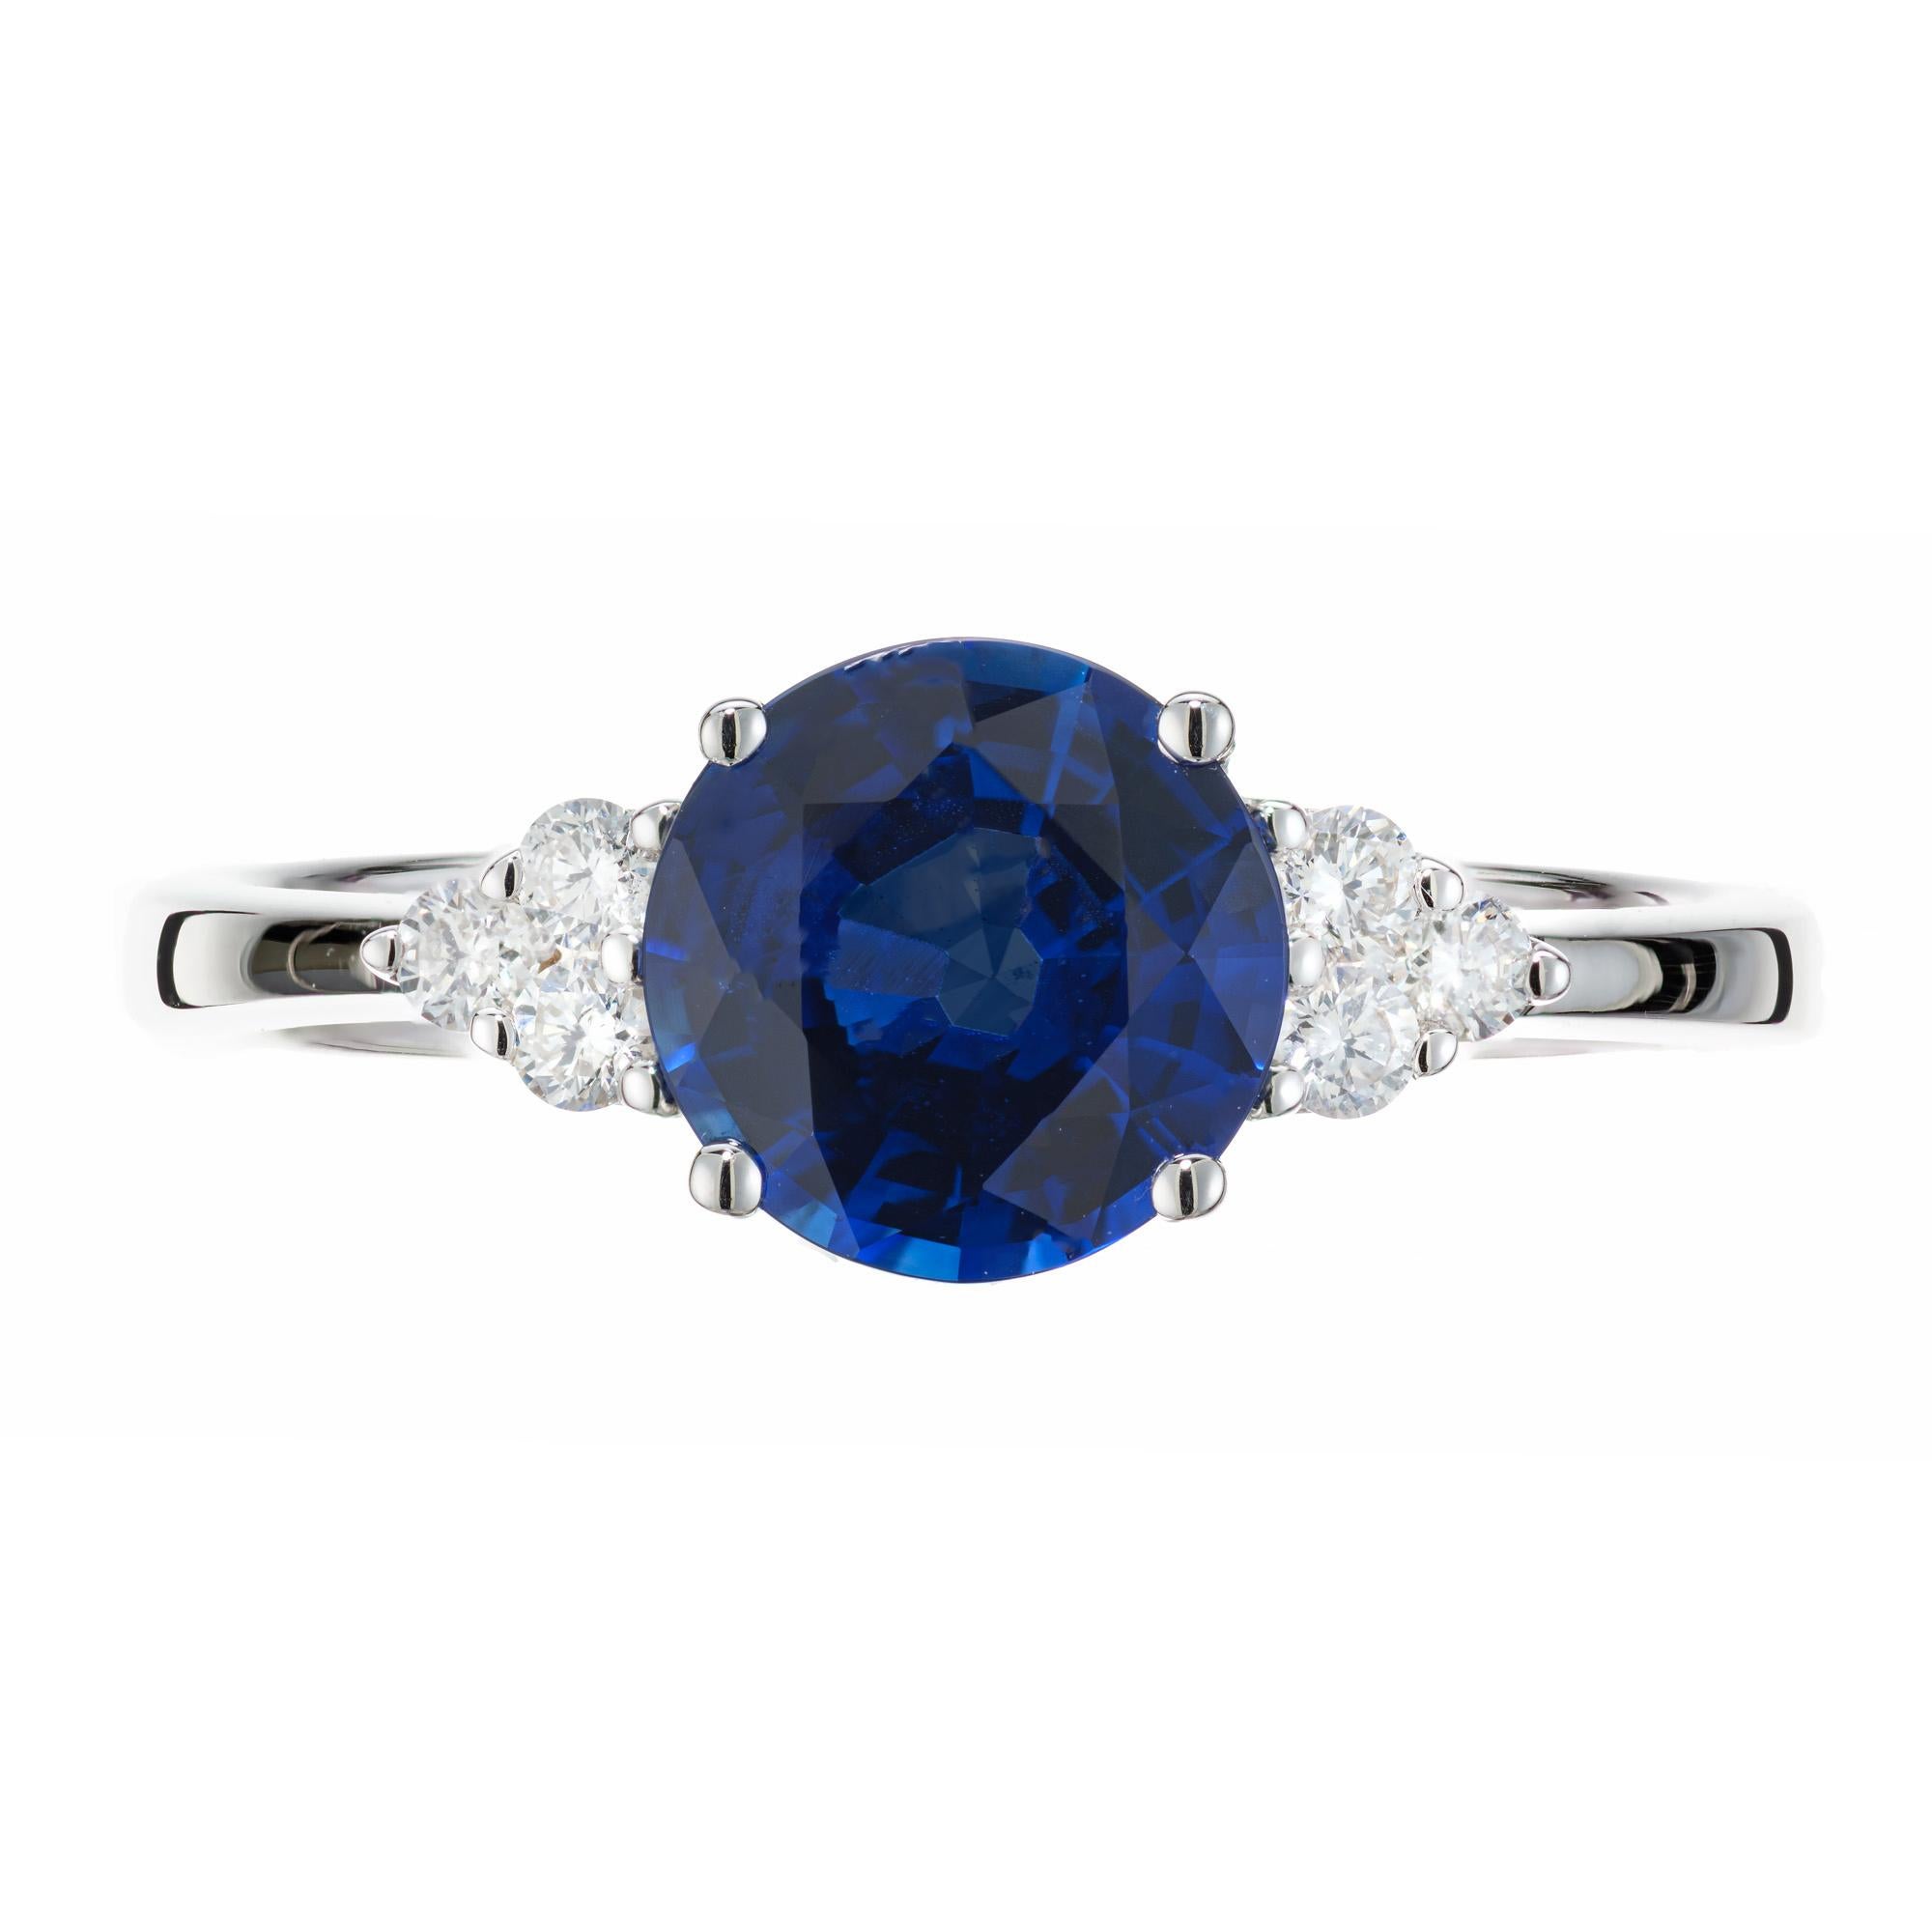 Sapphire and diamond engagement ring. GIA certified round rich warm blue 1.49ct center stone set in a 18k white gold setting with 3 round near colorless diamonds on each side of the sapphire. This simple and classic design was created in the Peter